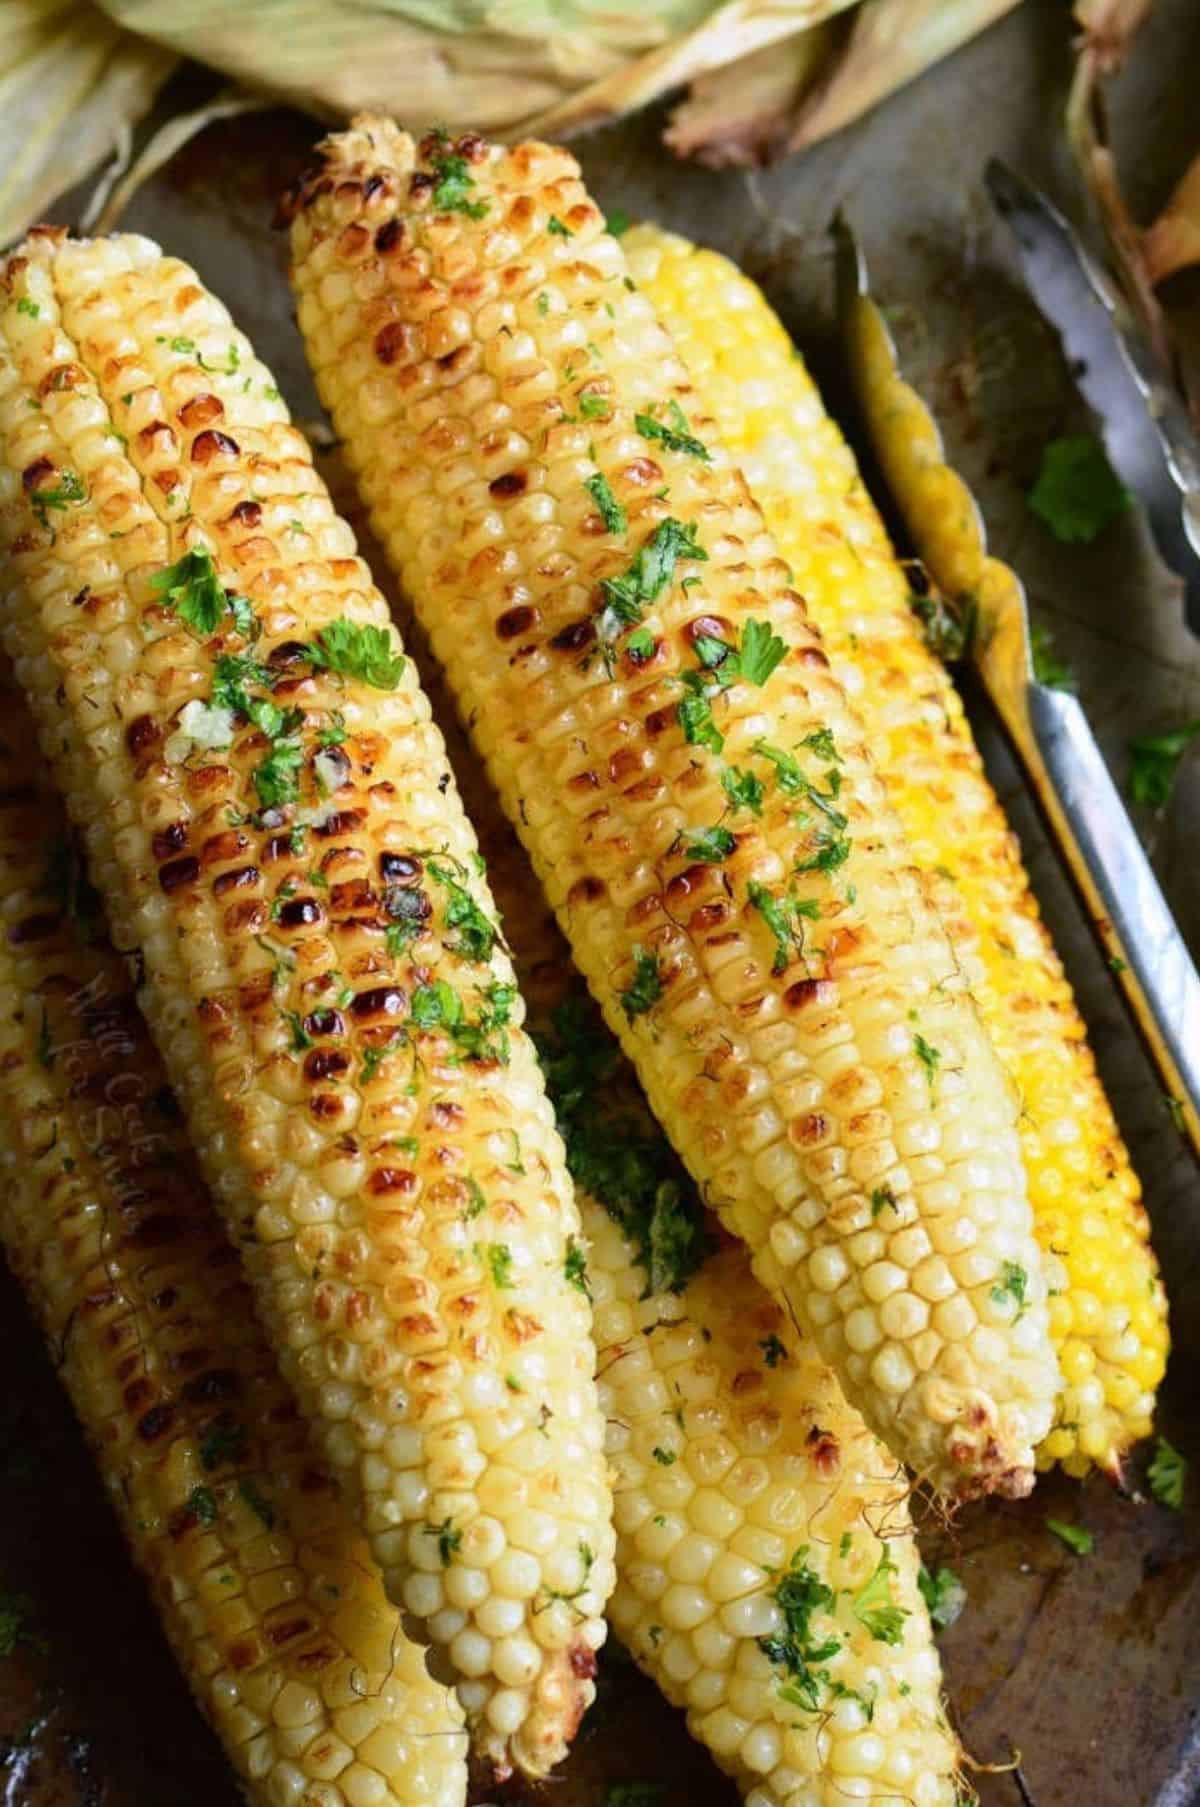 Several grilled cobs of corn are garnished with fresh herbs. 